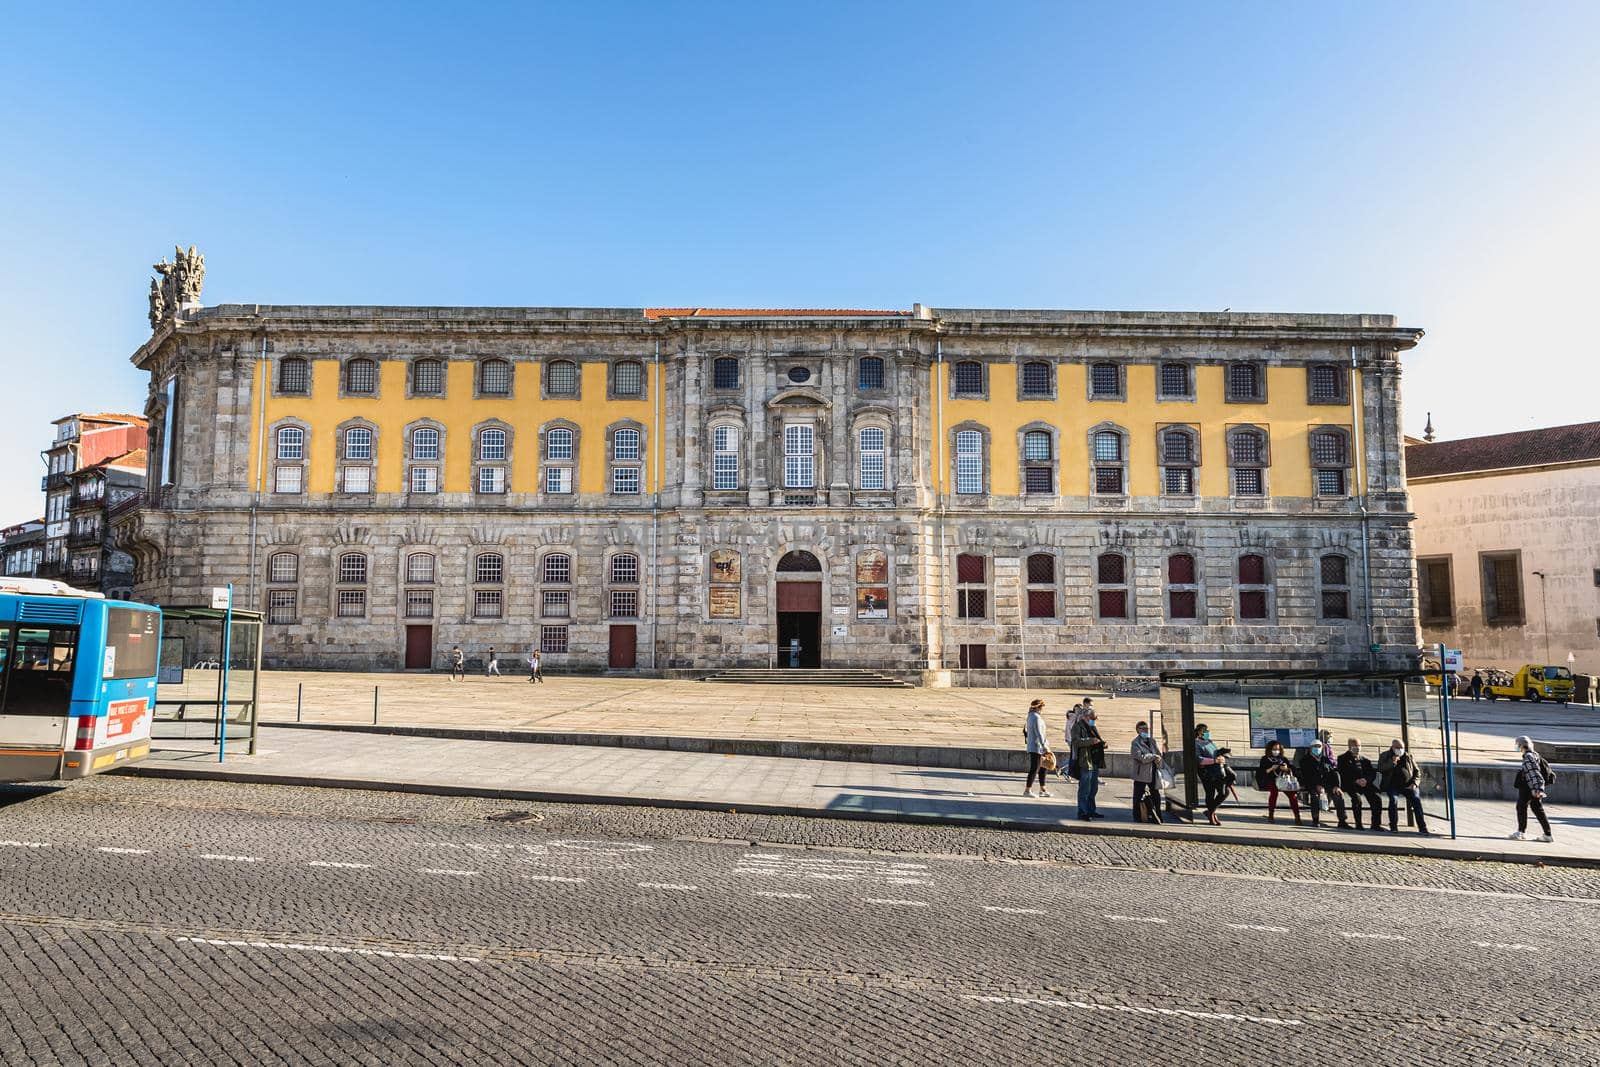 Facade of the Portuguese Electricity and Photography Museum in Porto, Portugal by AtlanticEUROSTOXX